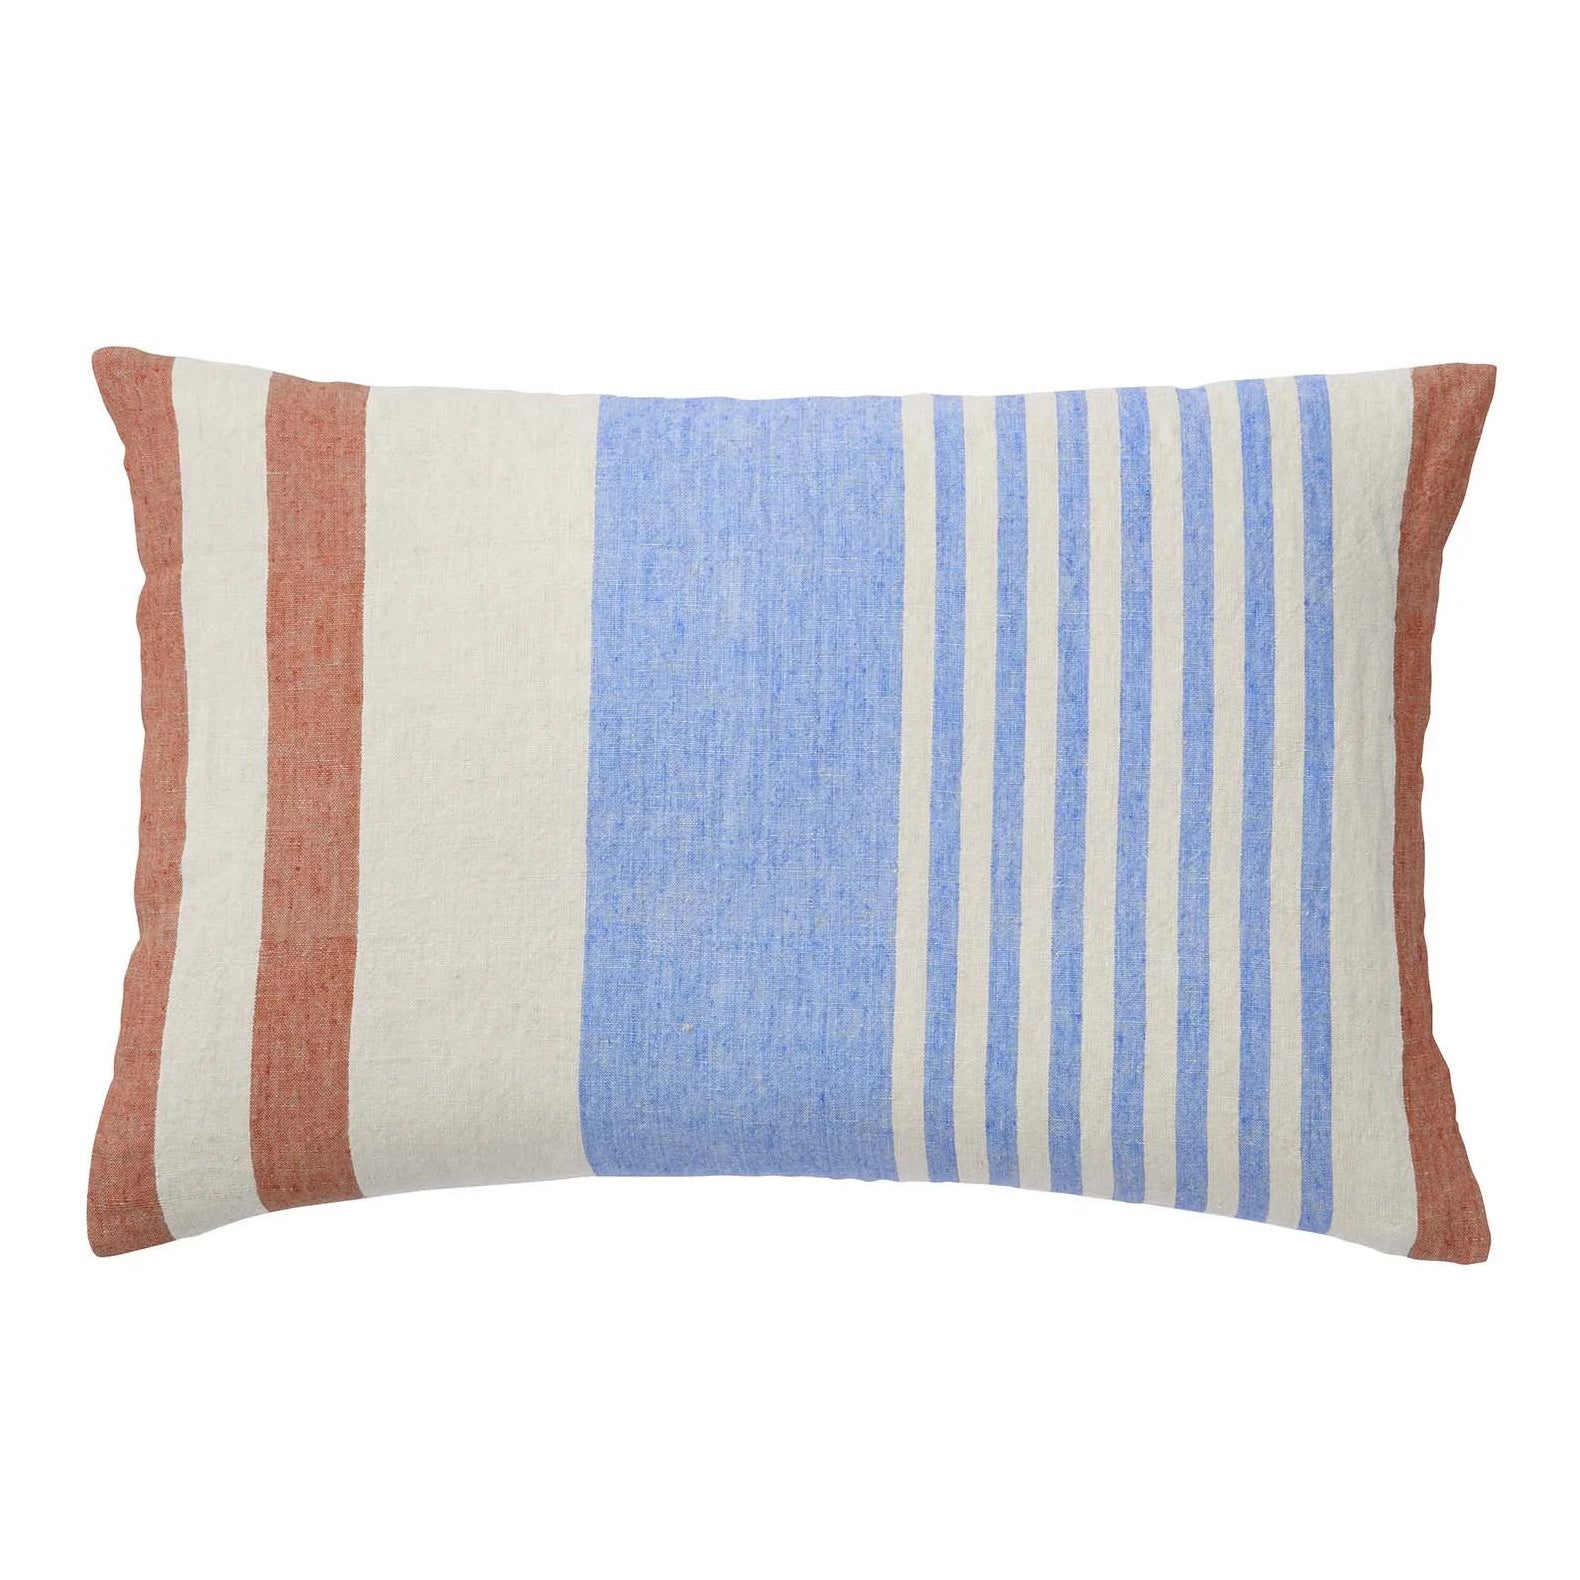 Cozy Living Maggie Striped Linen Cushion